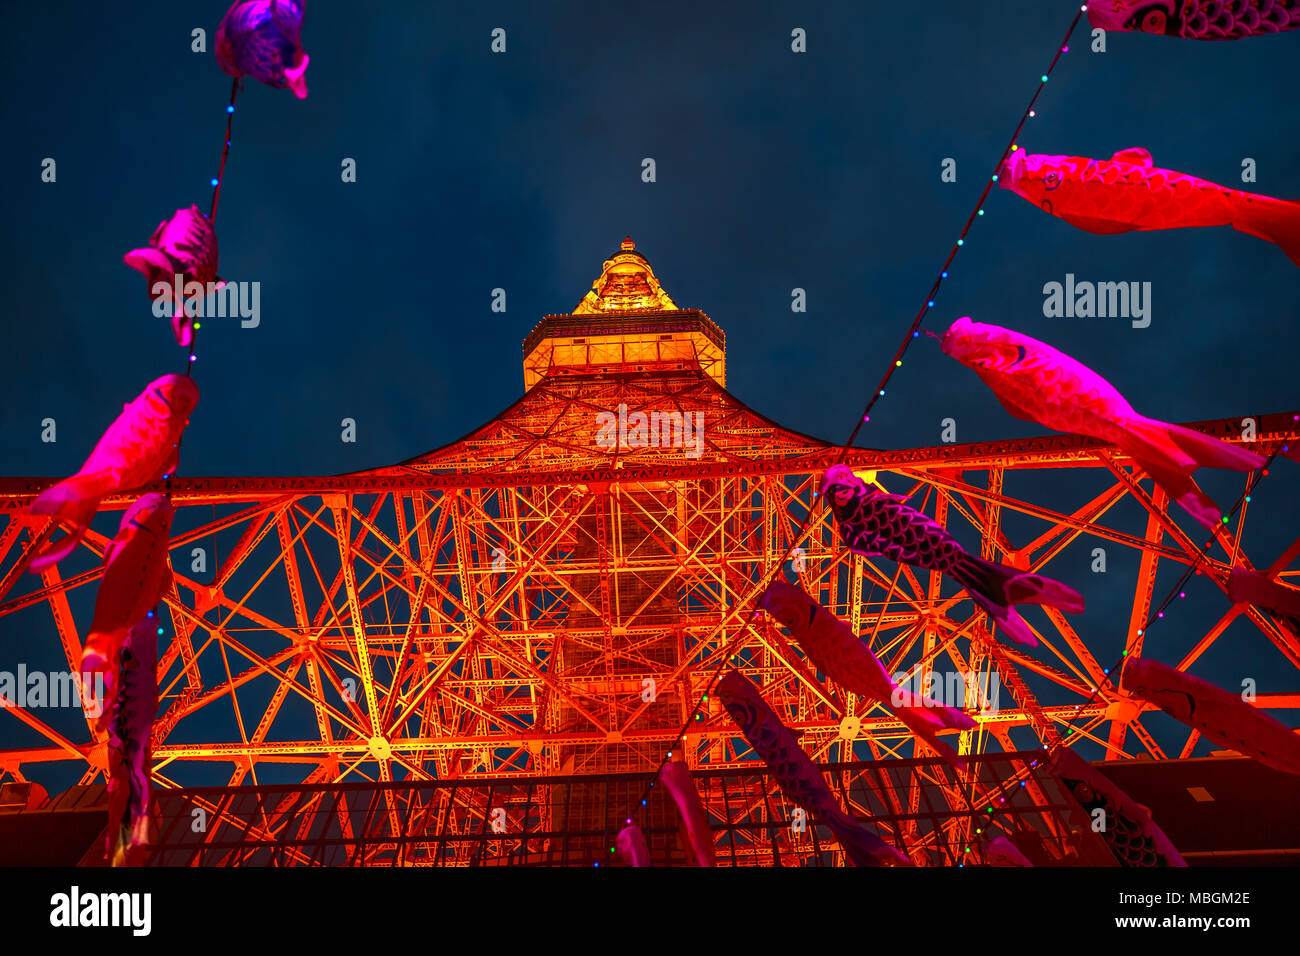 Tokyo, Japan - April 23, 2017: colorful Koinobori at Tokyo Tower by night. Koinobori are carp-shaped wind socks traditionally flown in Japan to celebrate Children's Day. Focus on Tokyo Tower. Stock Photo